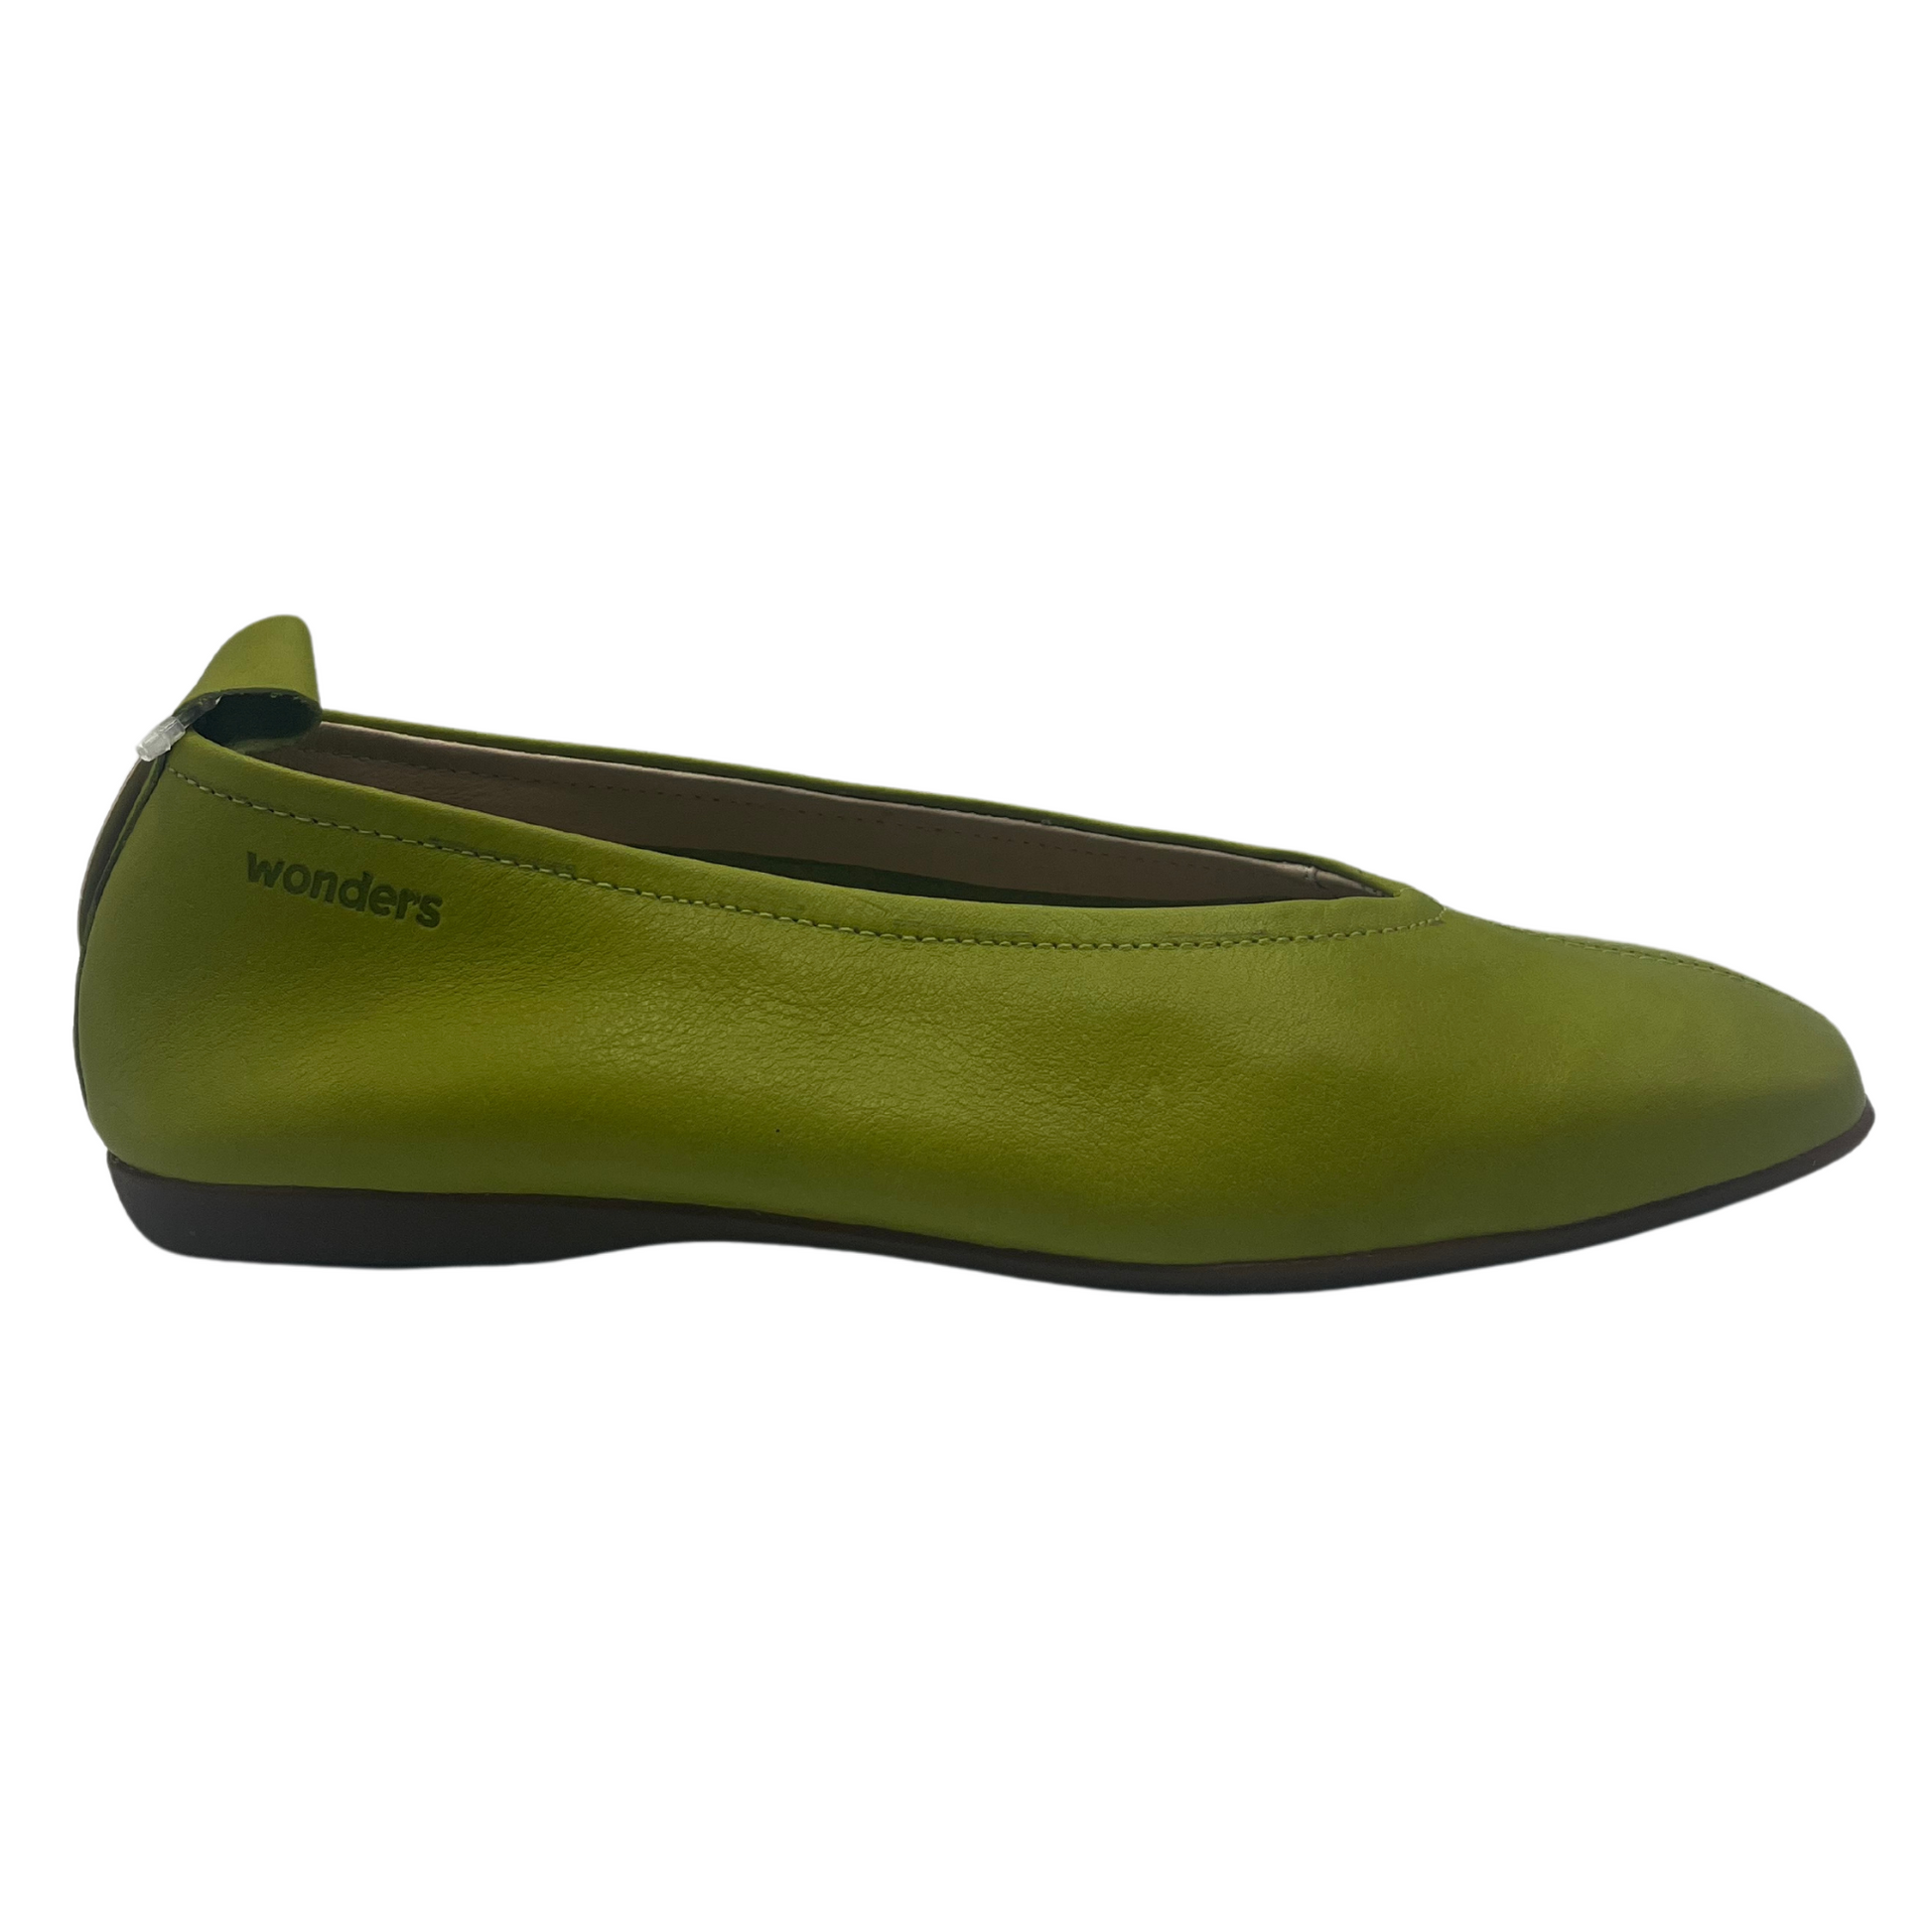 Right facing view of apple green ballet flat with rubber outsole